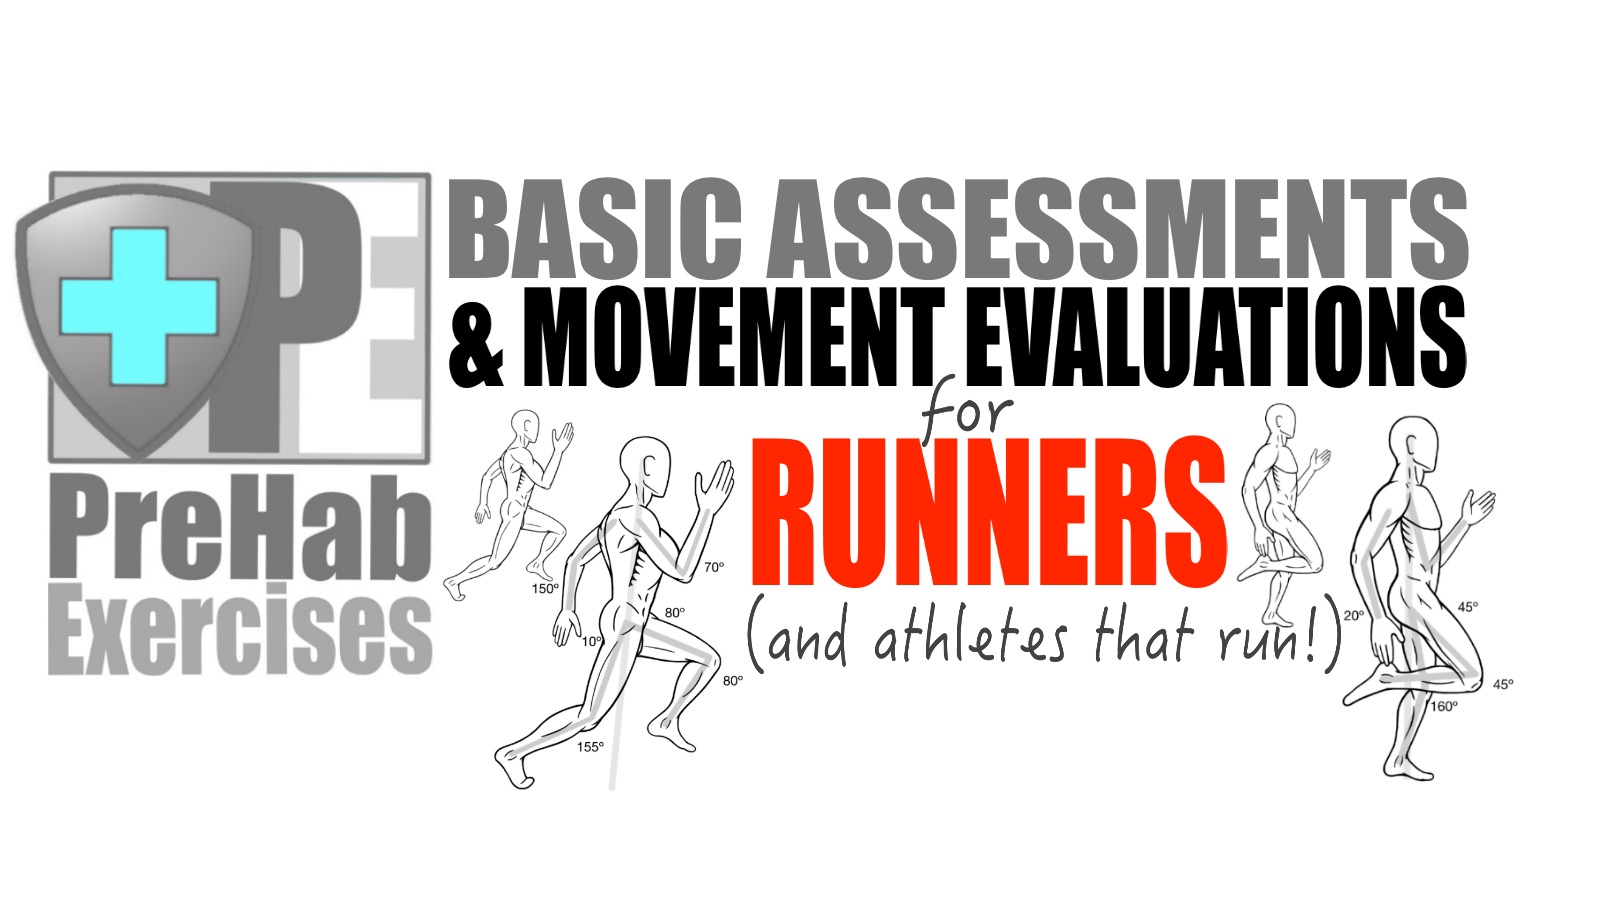 Basic Assessments and Movement Evaluations for Runners